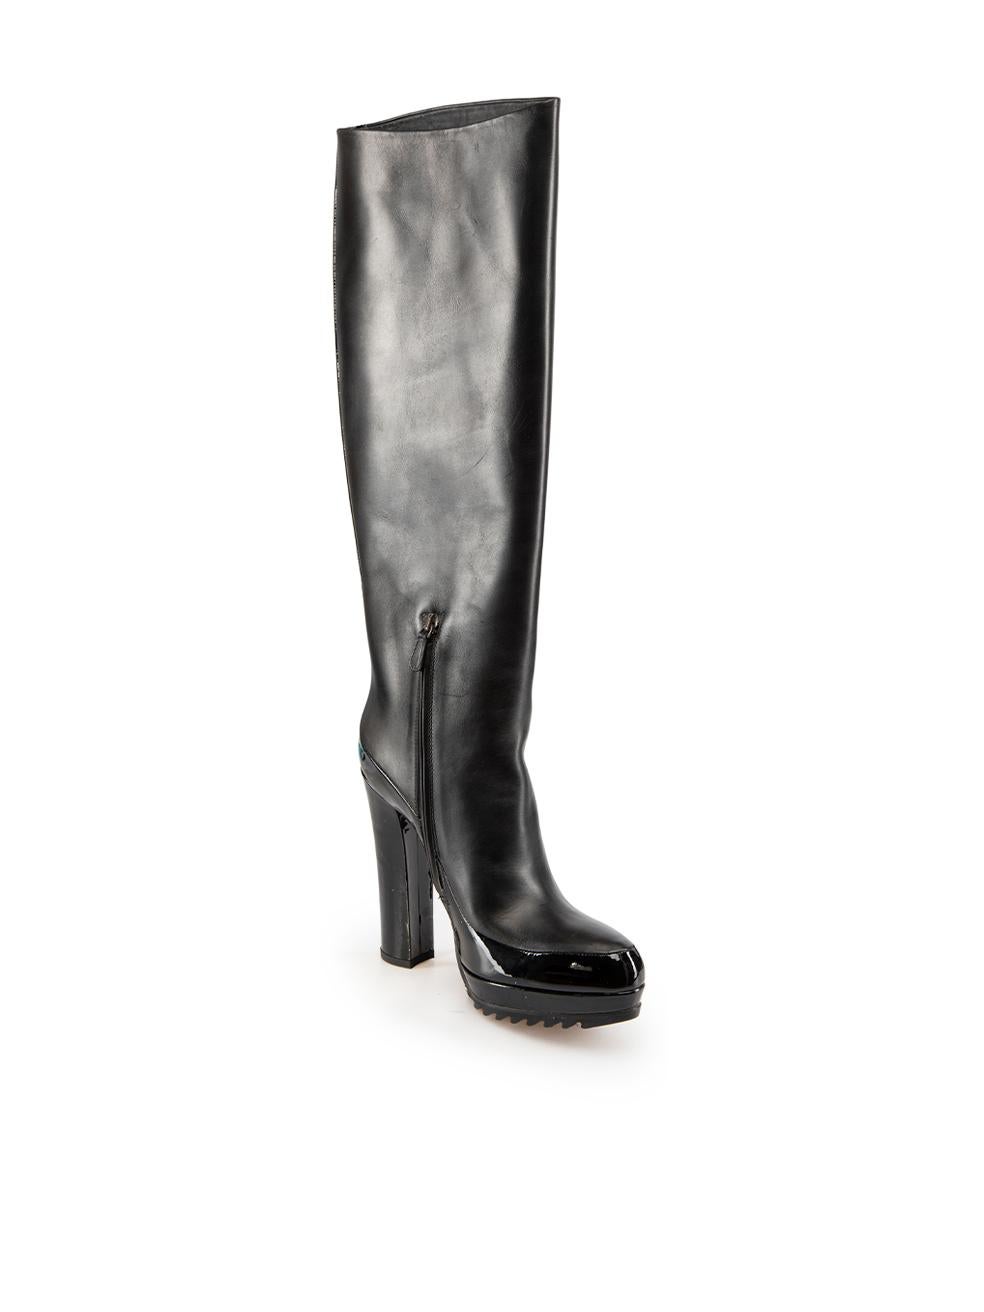 CONDITION is Very good. Minimal wear to boots is evident. Minimal wear to both sides of both boot legs with scratches to the leather on this used Bottega Veneta designer resale item.
 
 Details
 Black
 Leather
 Knee high boots
 Point toe
 Platform
